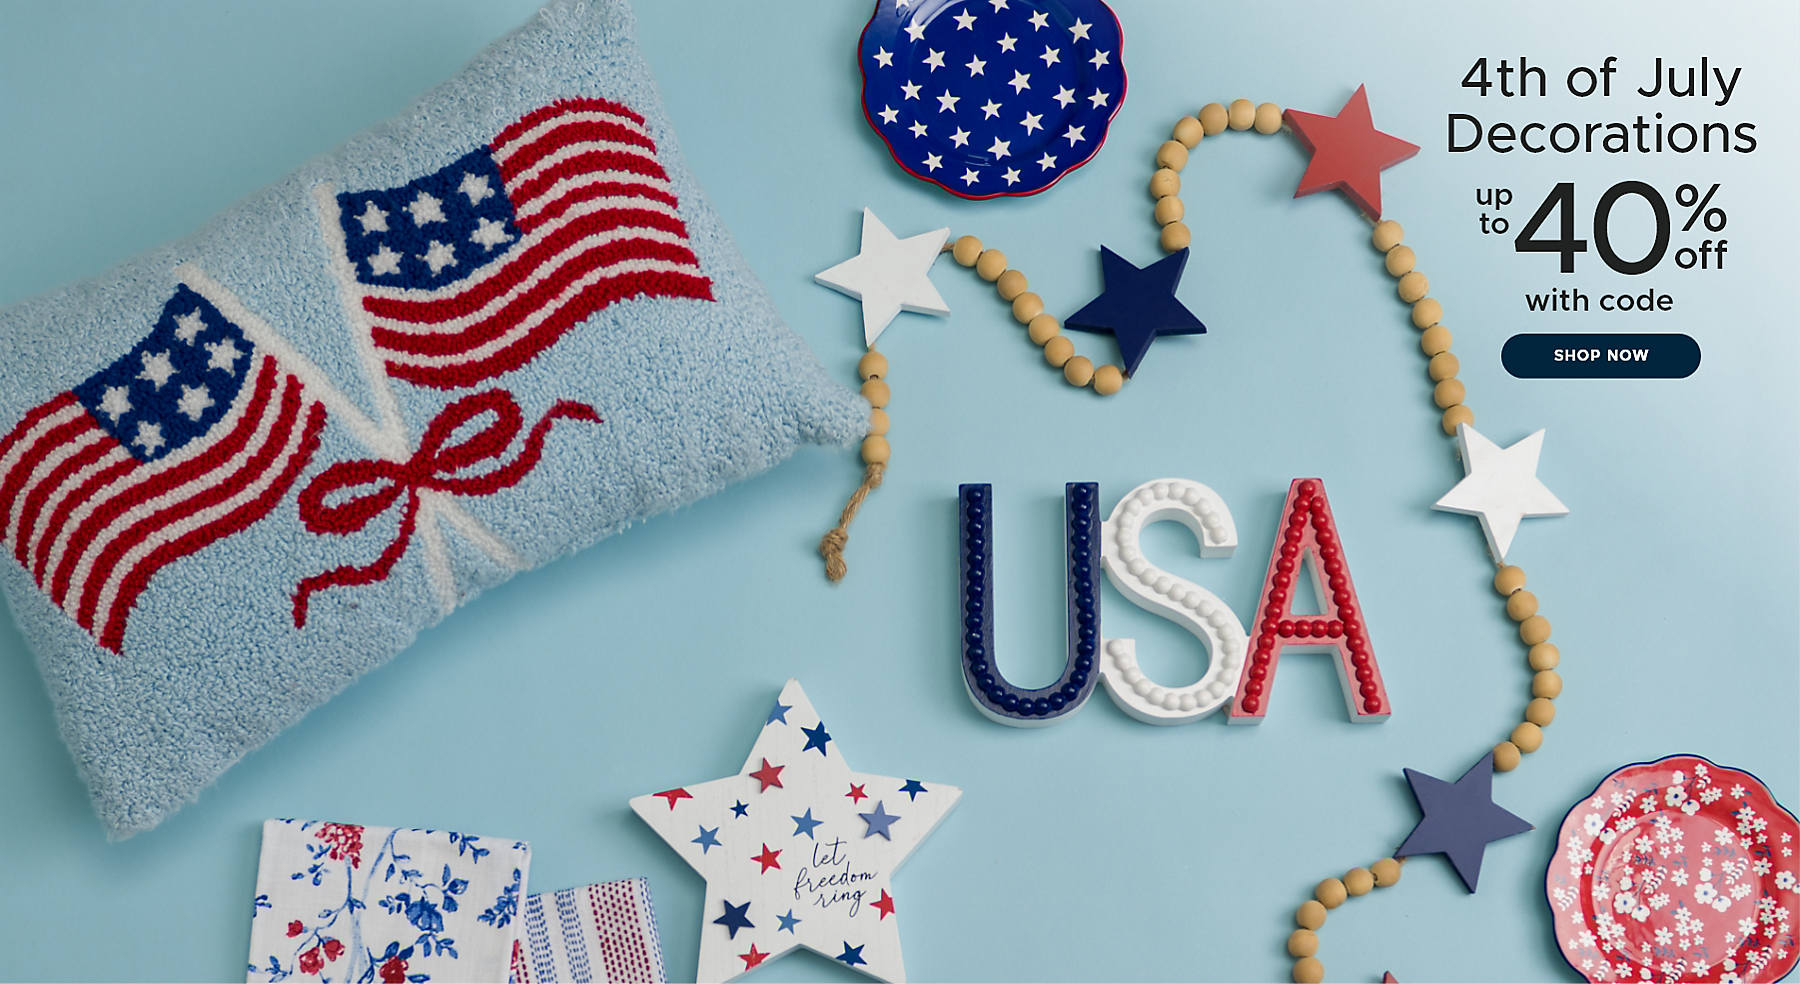 4th of July Decorations up to 40% off with code shop now